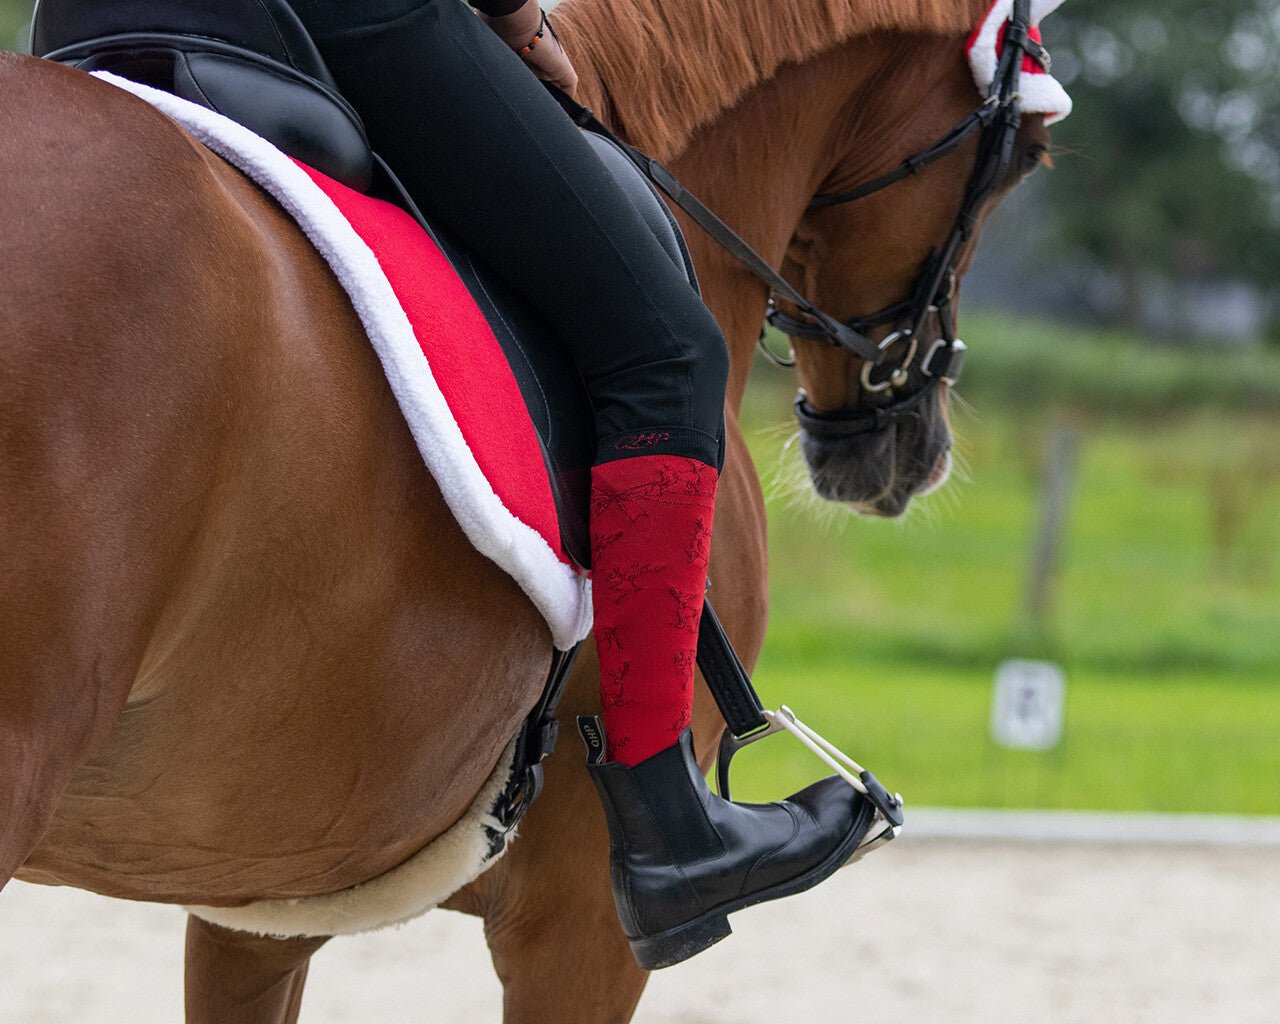 QHP Boot Socks: Christmas 2-Pack in Black/ Red (Multiple Sizes)